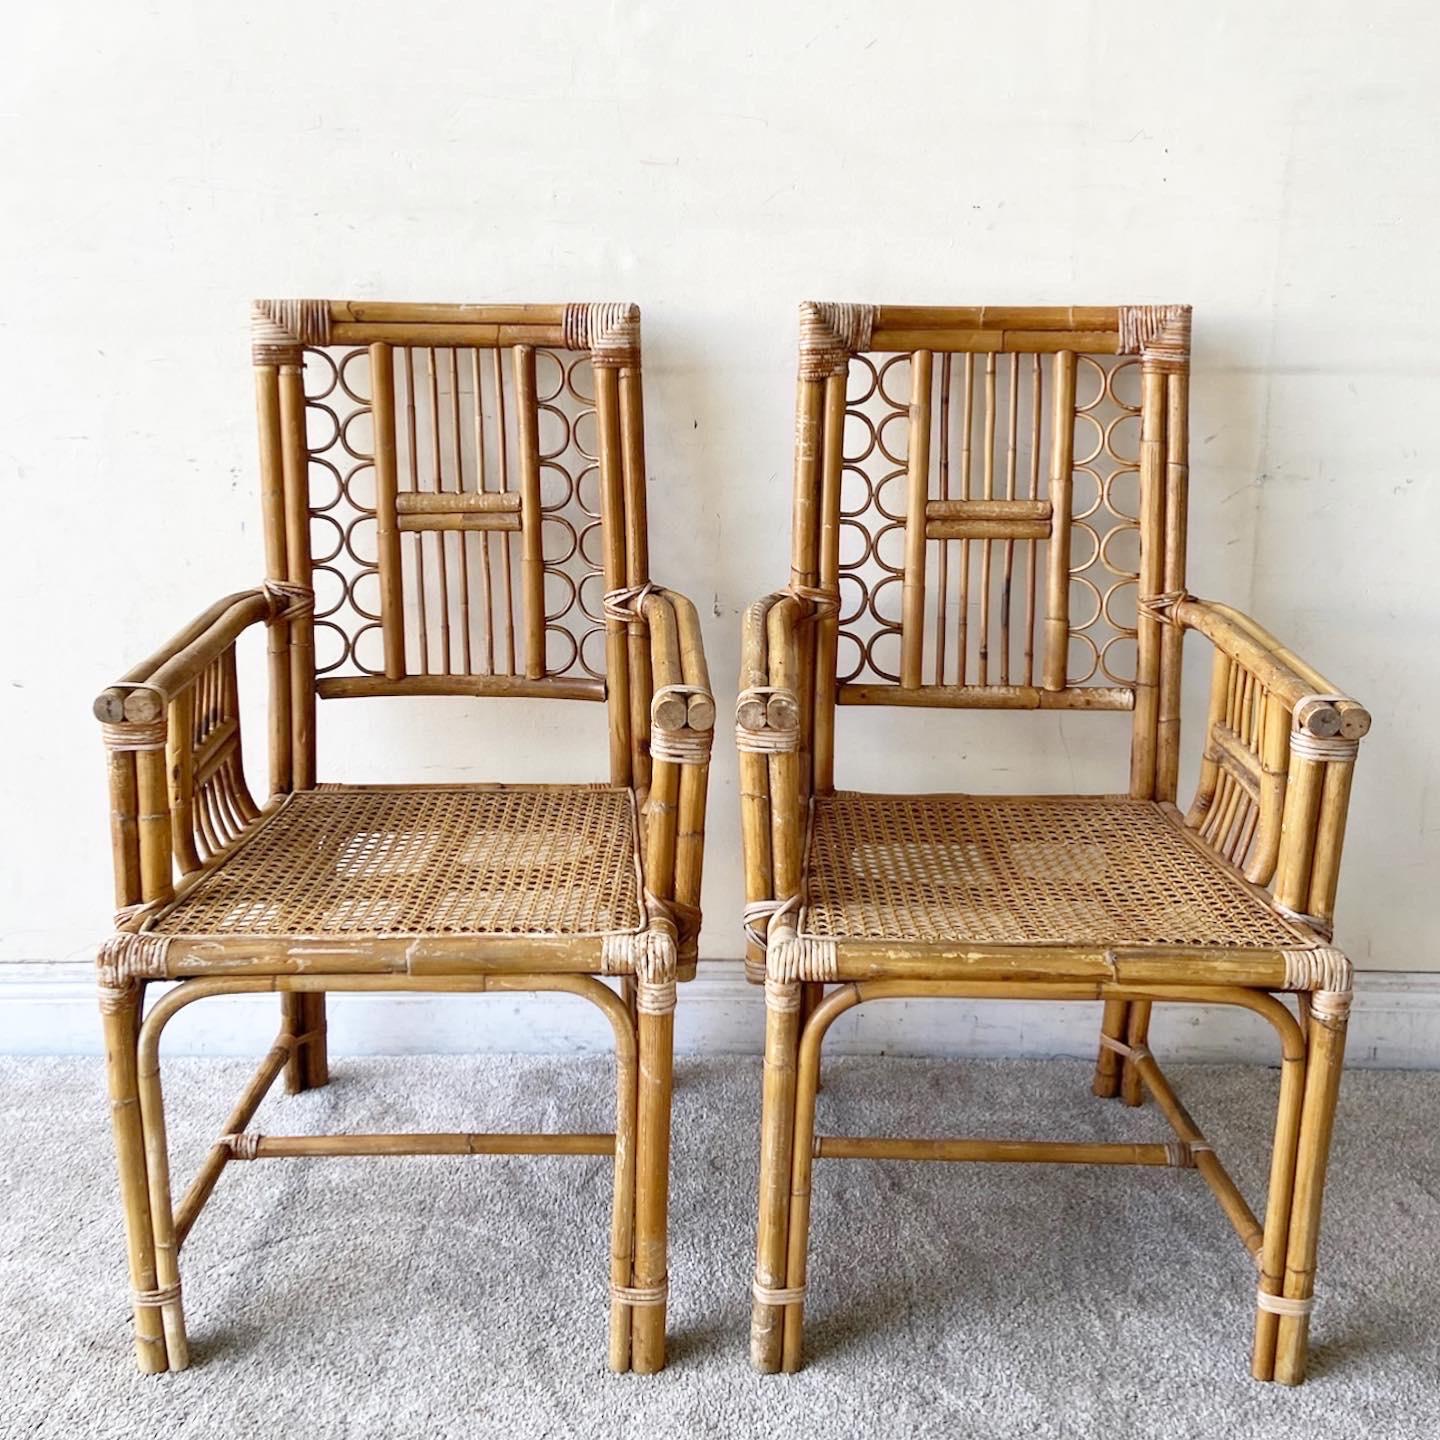 Phenomenal pair of vintage bohemian bamboo and rattan dining chairs. Each feature a can seat with a fretted back rest.
 